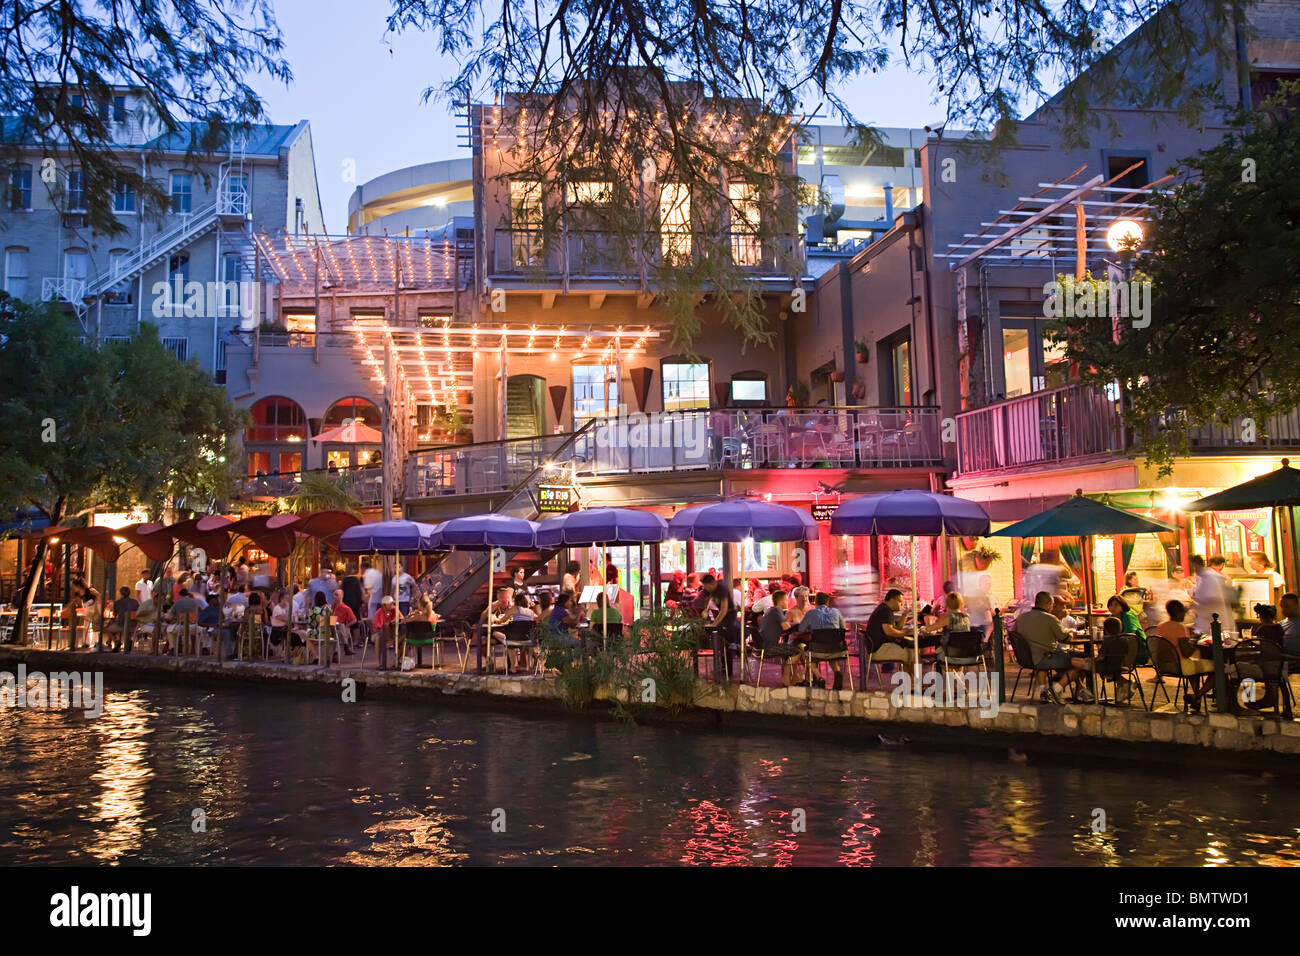 People eating at tables in shade at dusk on San Antonio River Walk